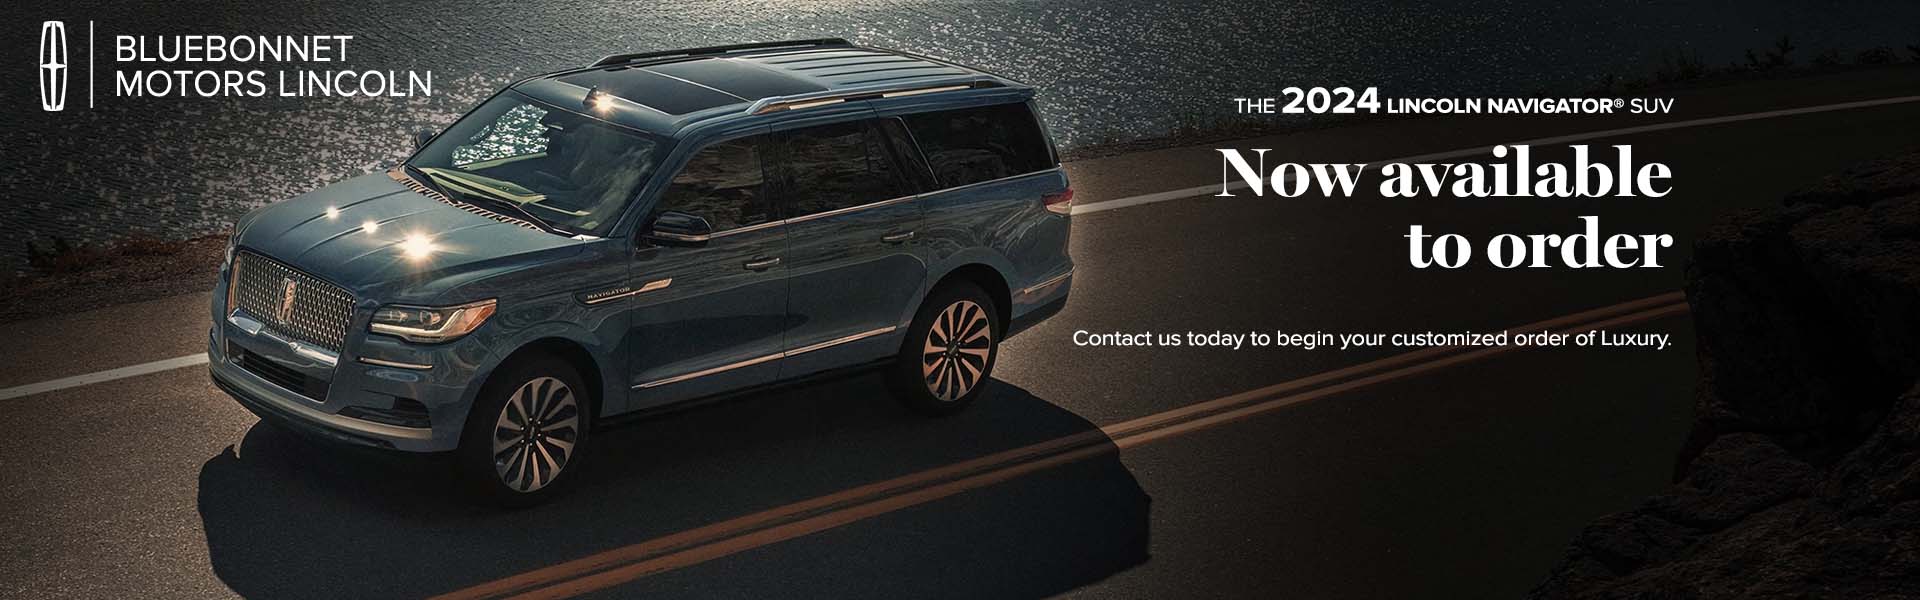 2024 Navigator now available to order at Bluebonnet Lincoln